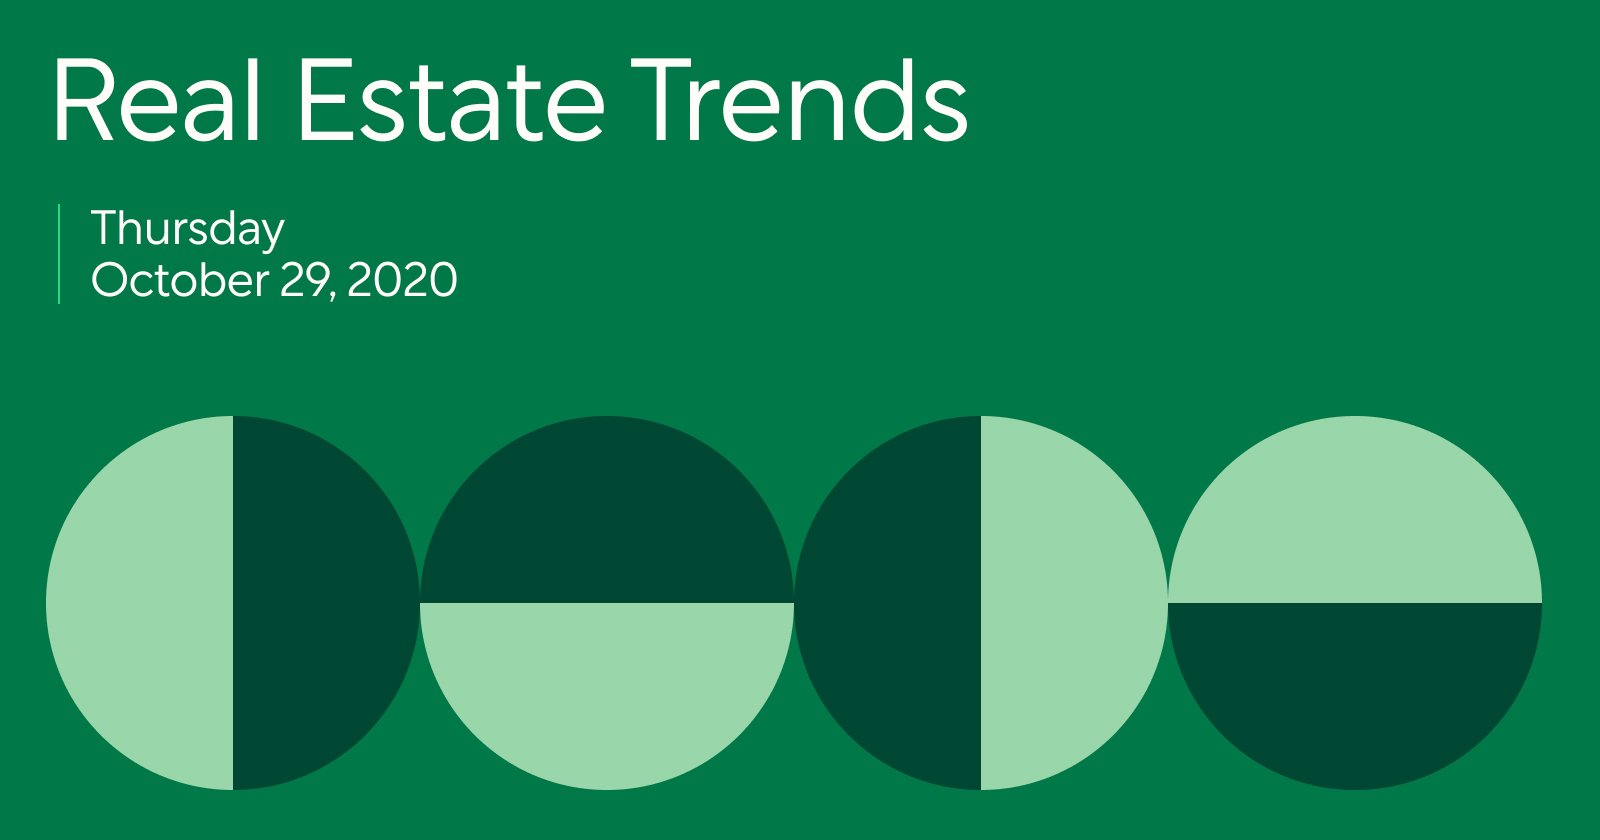 Trends Report for Real Estate Agents 10/29/20: Millennials Drive Home Sales as Low Rates Fuel Today’s Growing Demand for Homeownership&quot;